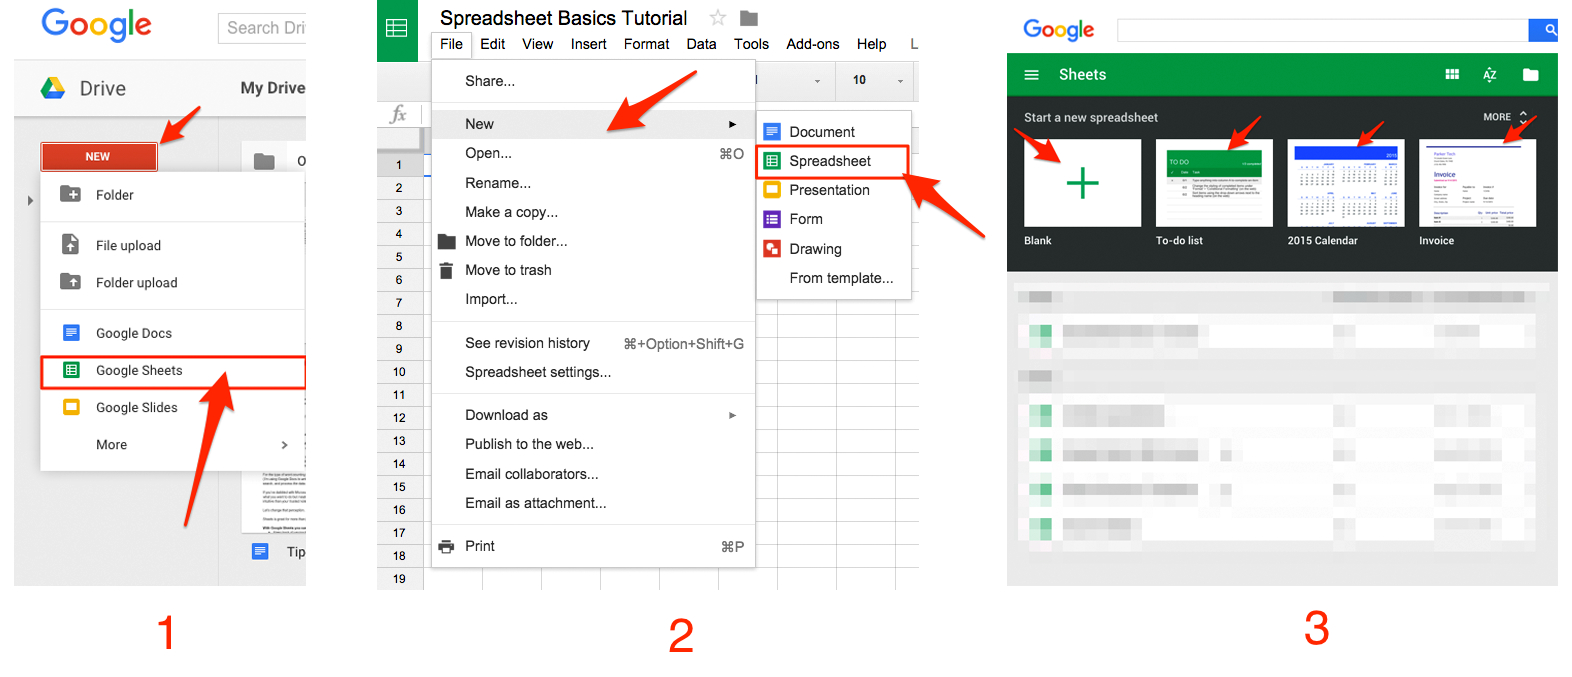 How To Create A Spreadsheet Inside Google Sheets 101: The Beginner's Guide To Online Spreadsheets  The